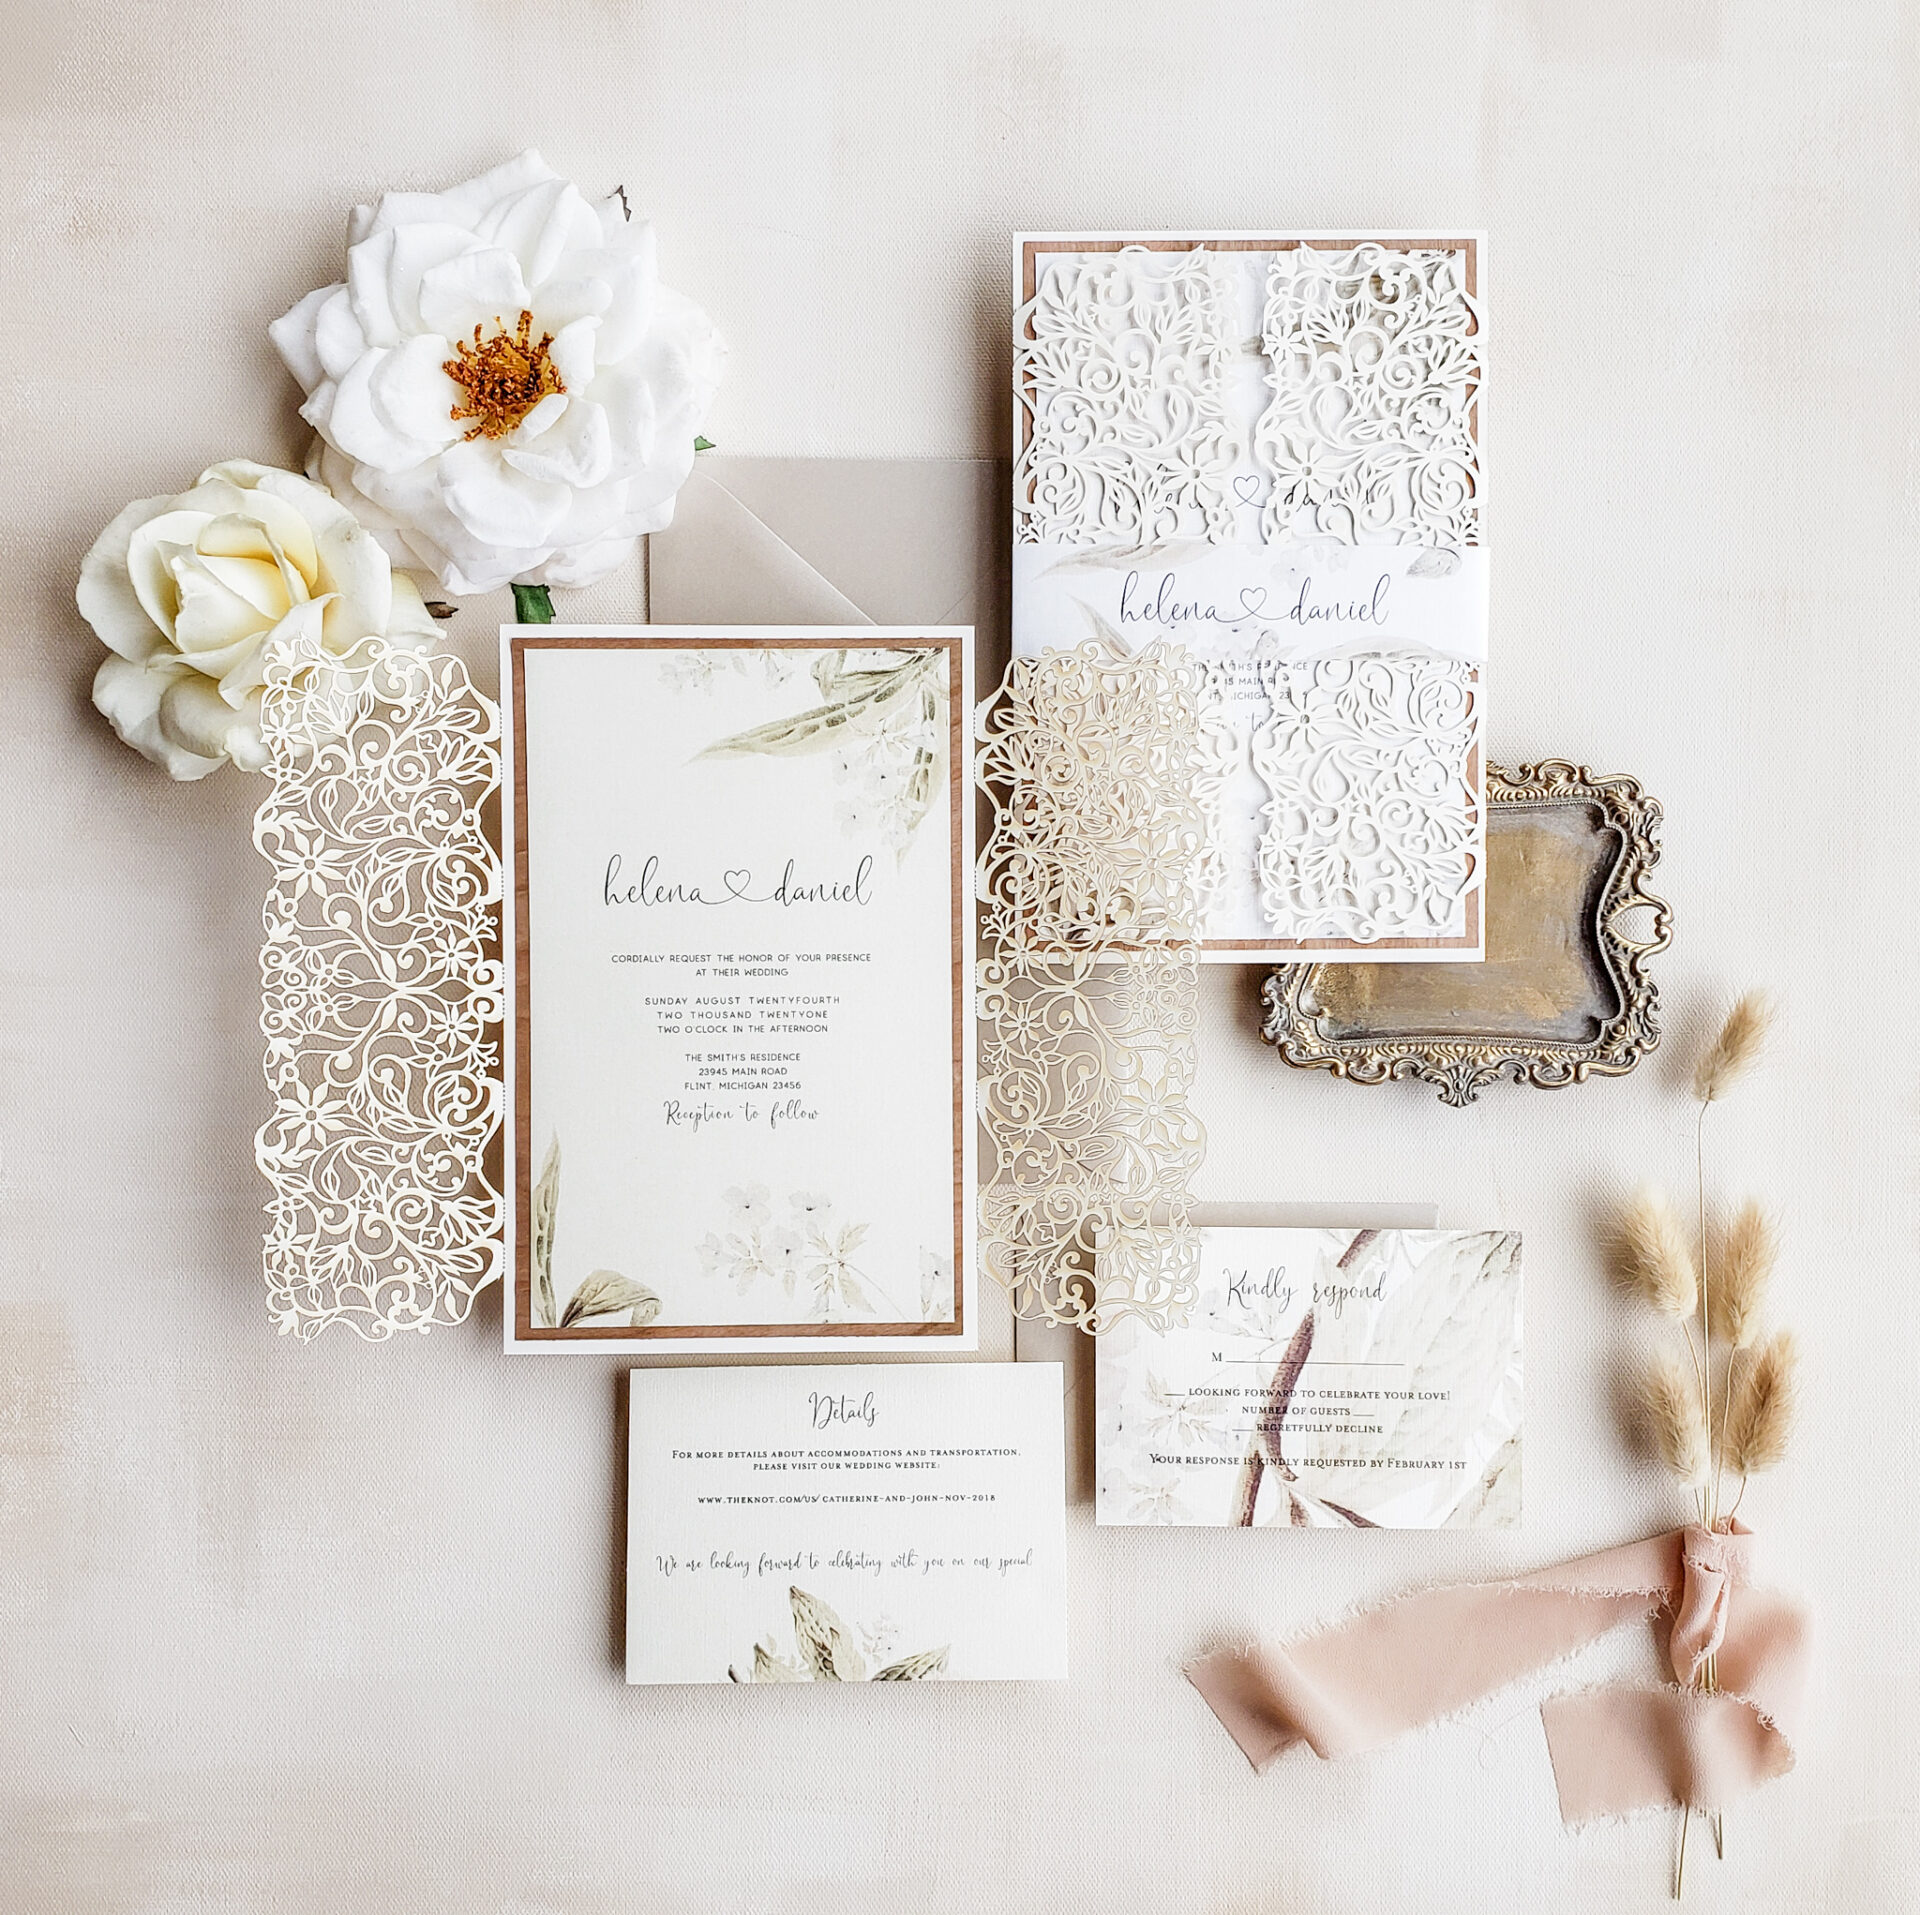 [vc_row][vc_column][vc_column_text]Purchase this listing to get a sample of our Chianti wedding invitation suite.

The sample includes:

• 5.5